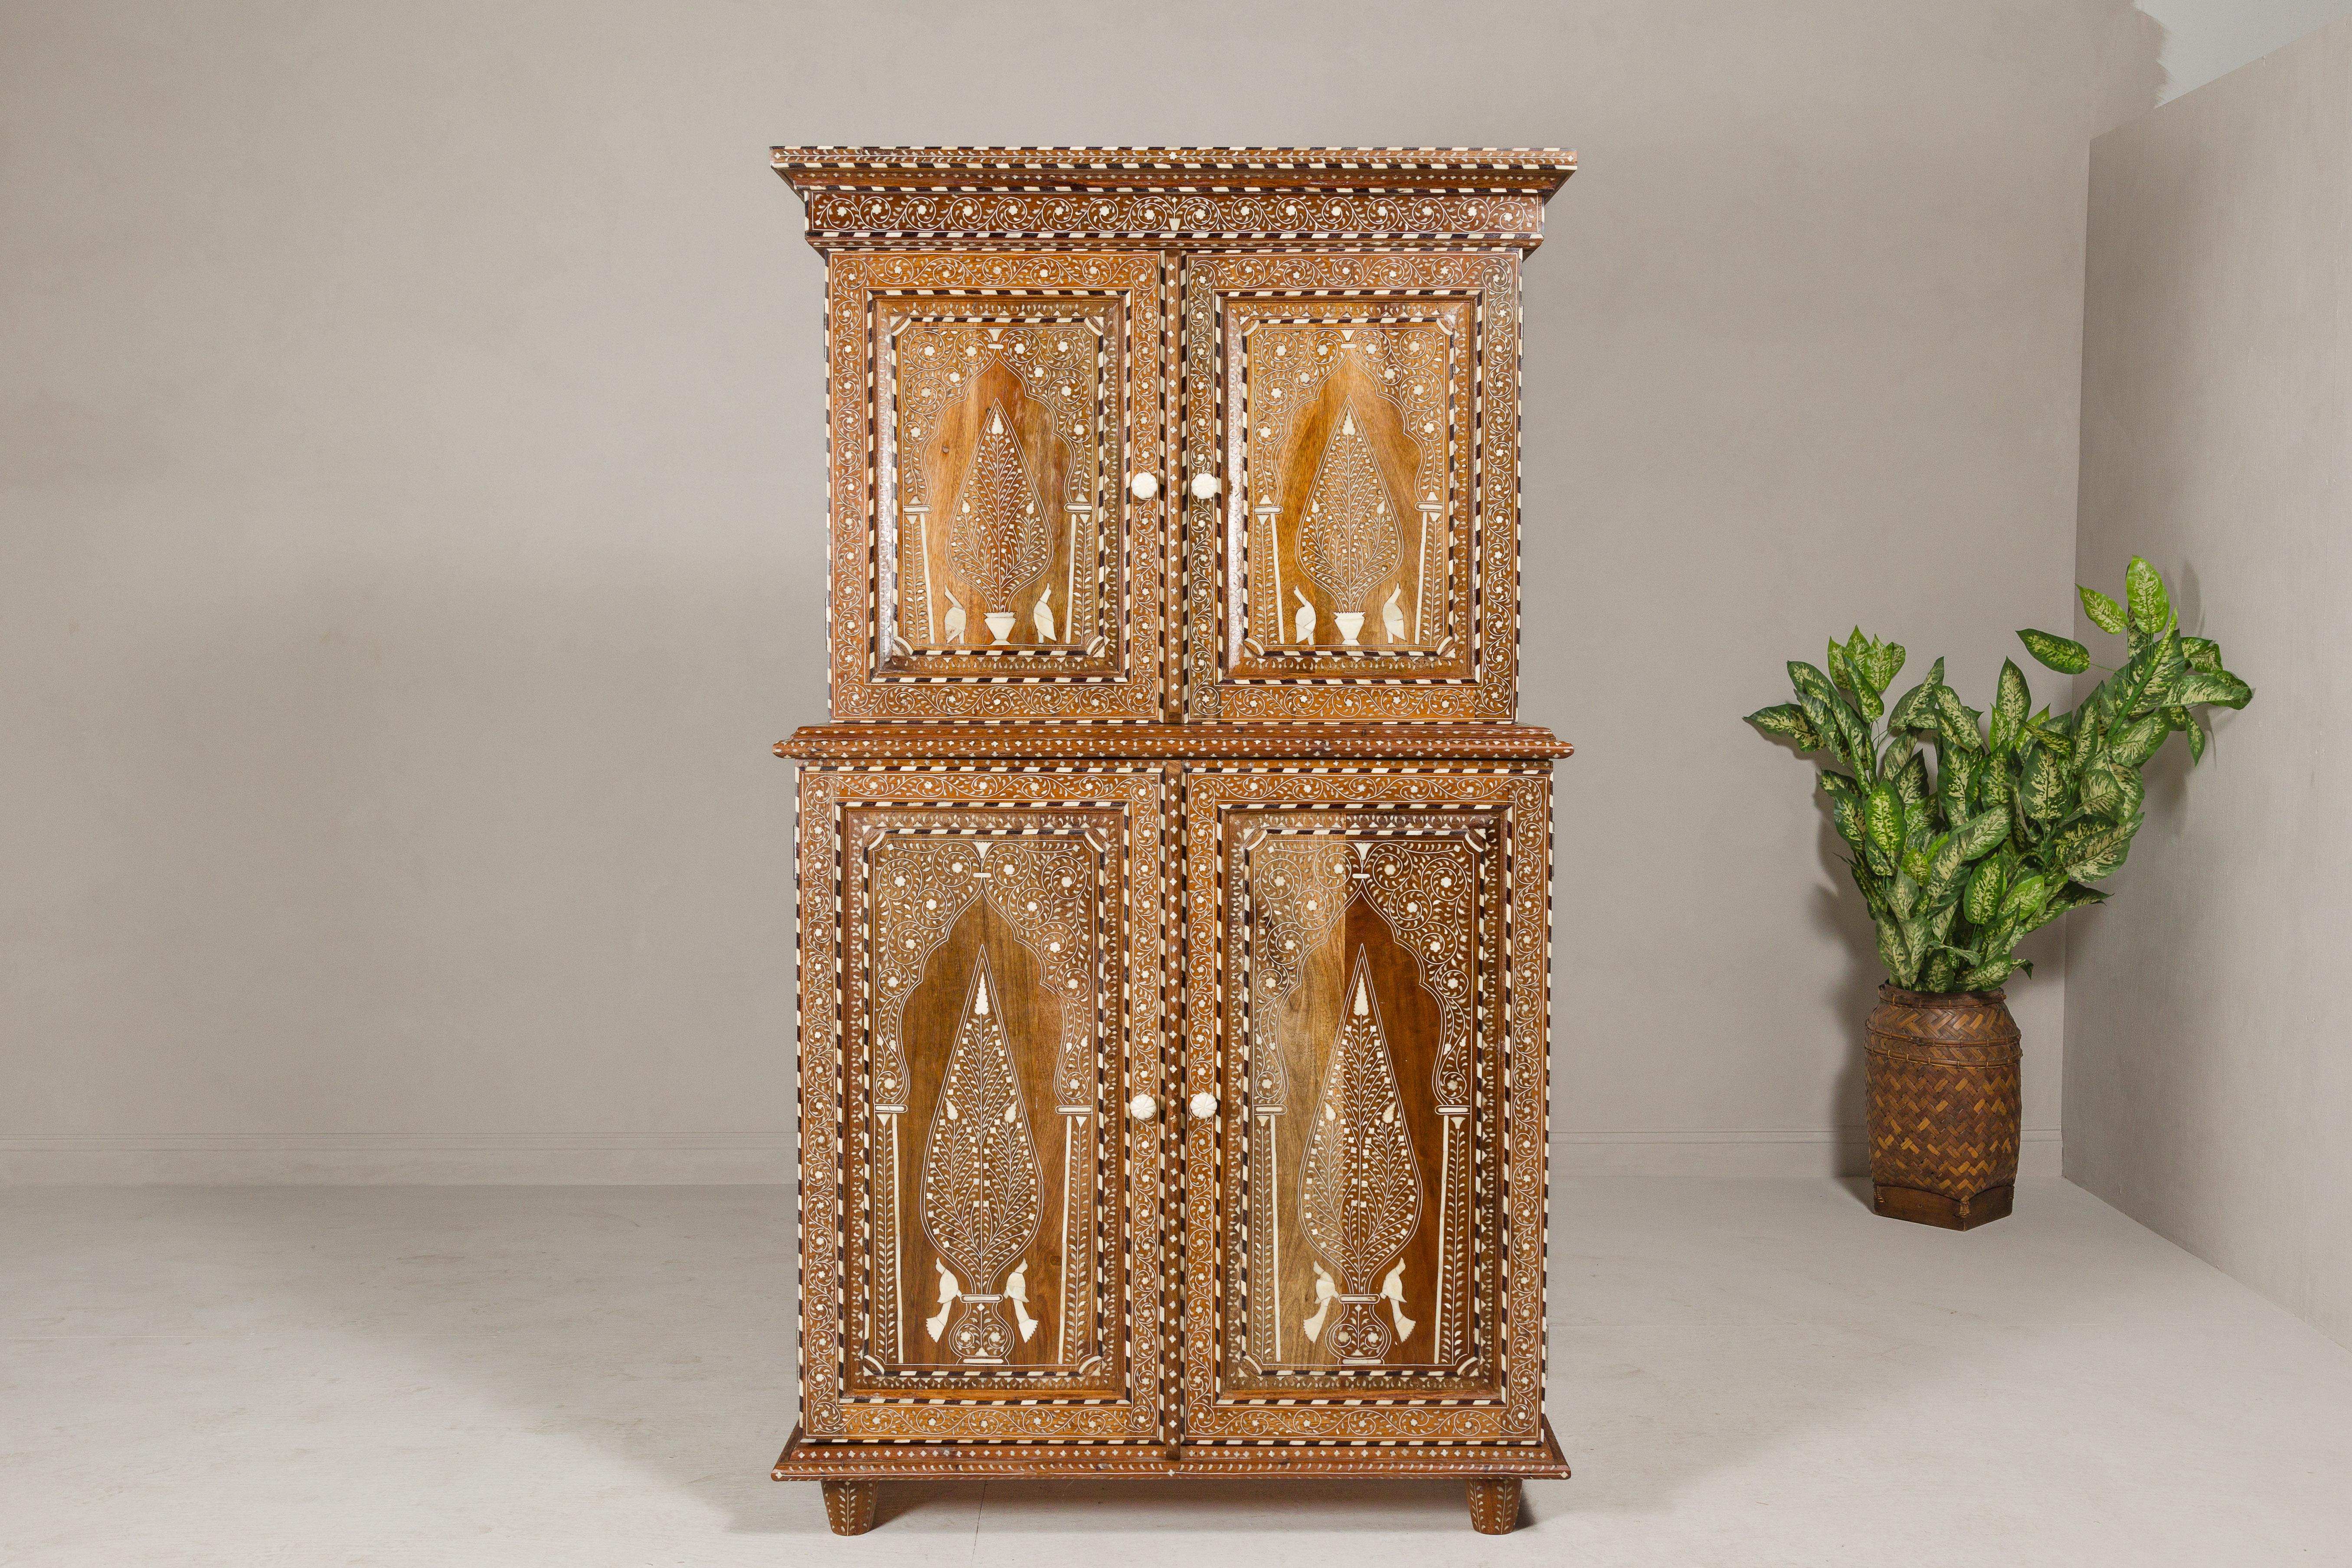 An Anglo-Indian style two part mango wood buffet à deux-corps with four doors, floral and bird themed bone inlaid décor, and flaming patterns on the doors. This Anglo-Indian style mango wood buffet à deux-corps is an opulent masterpiece that